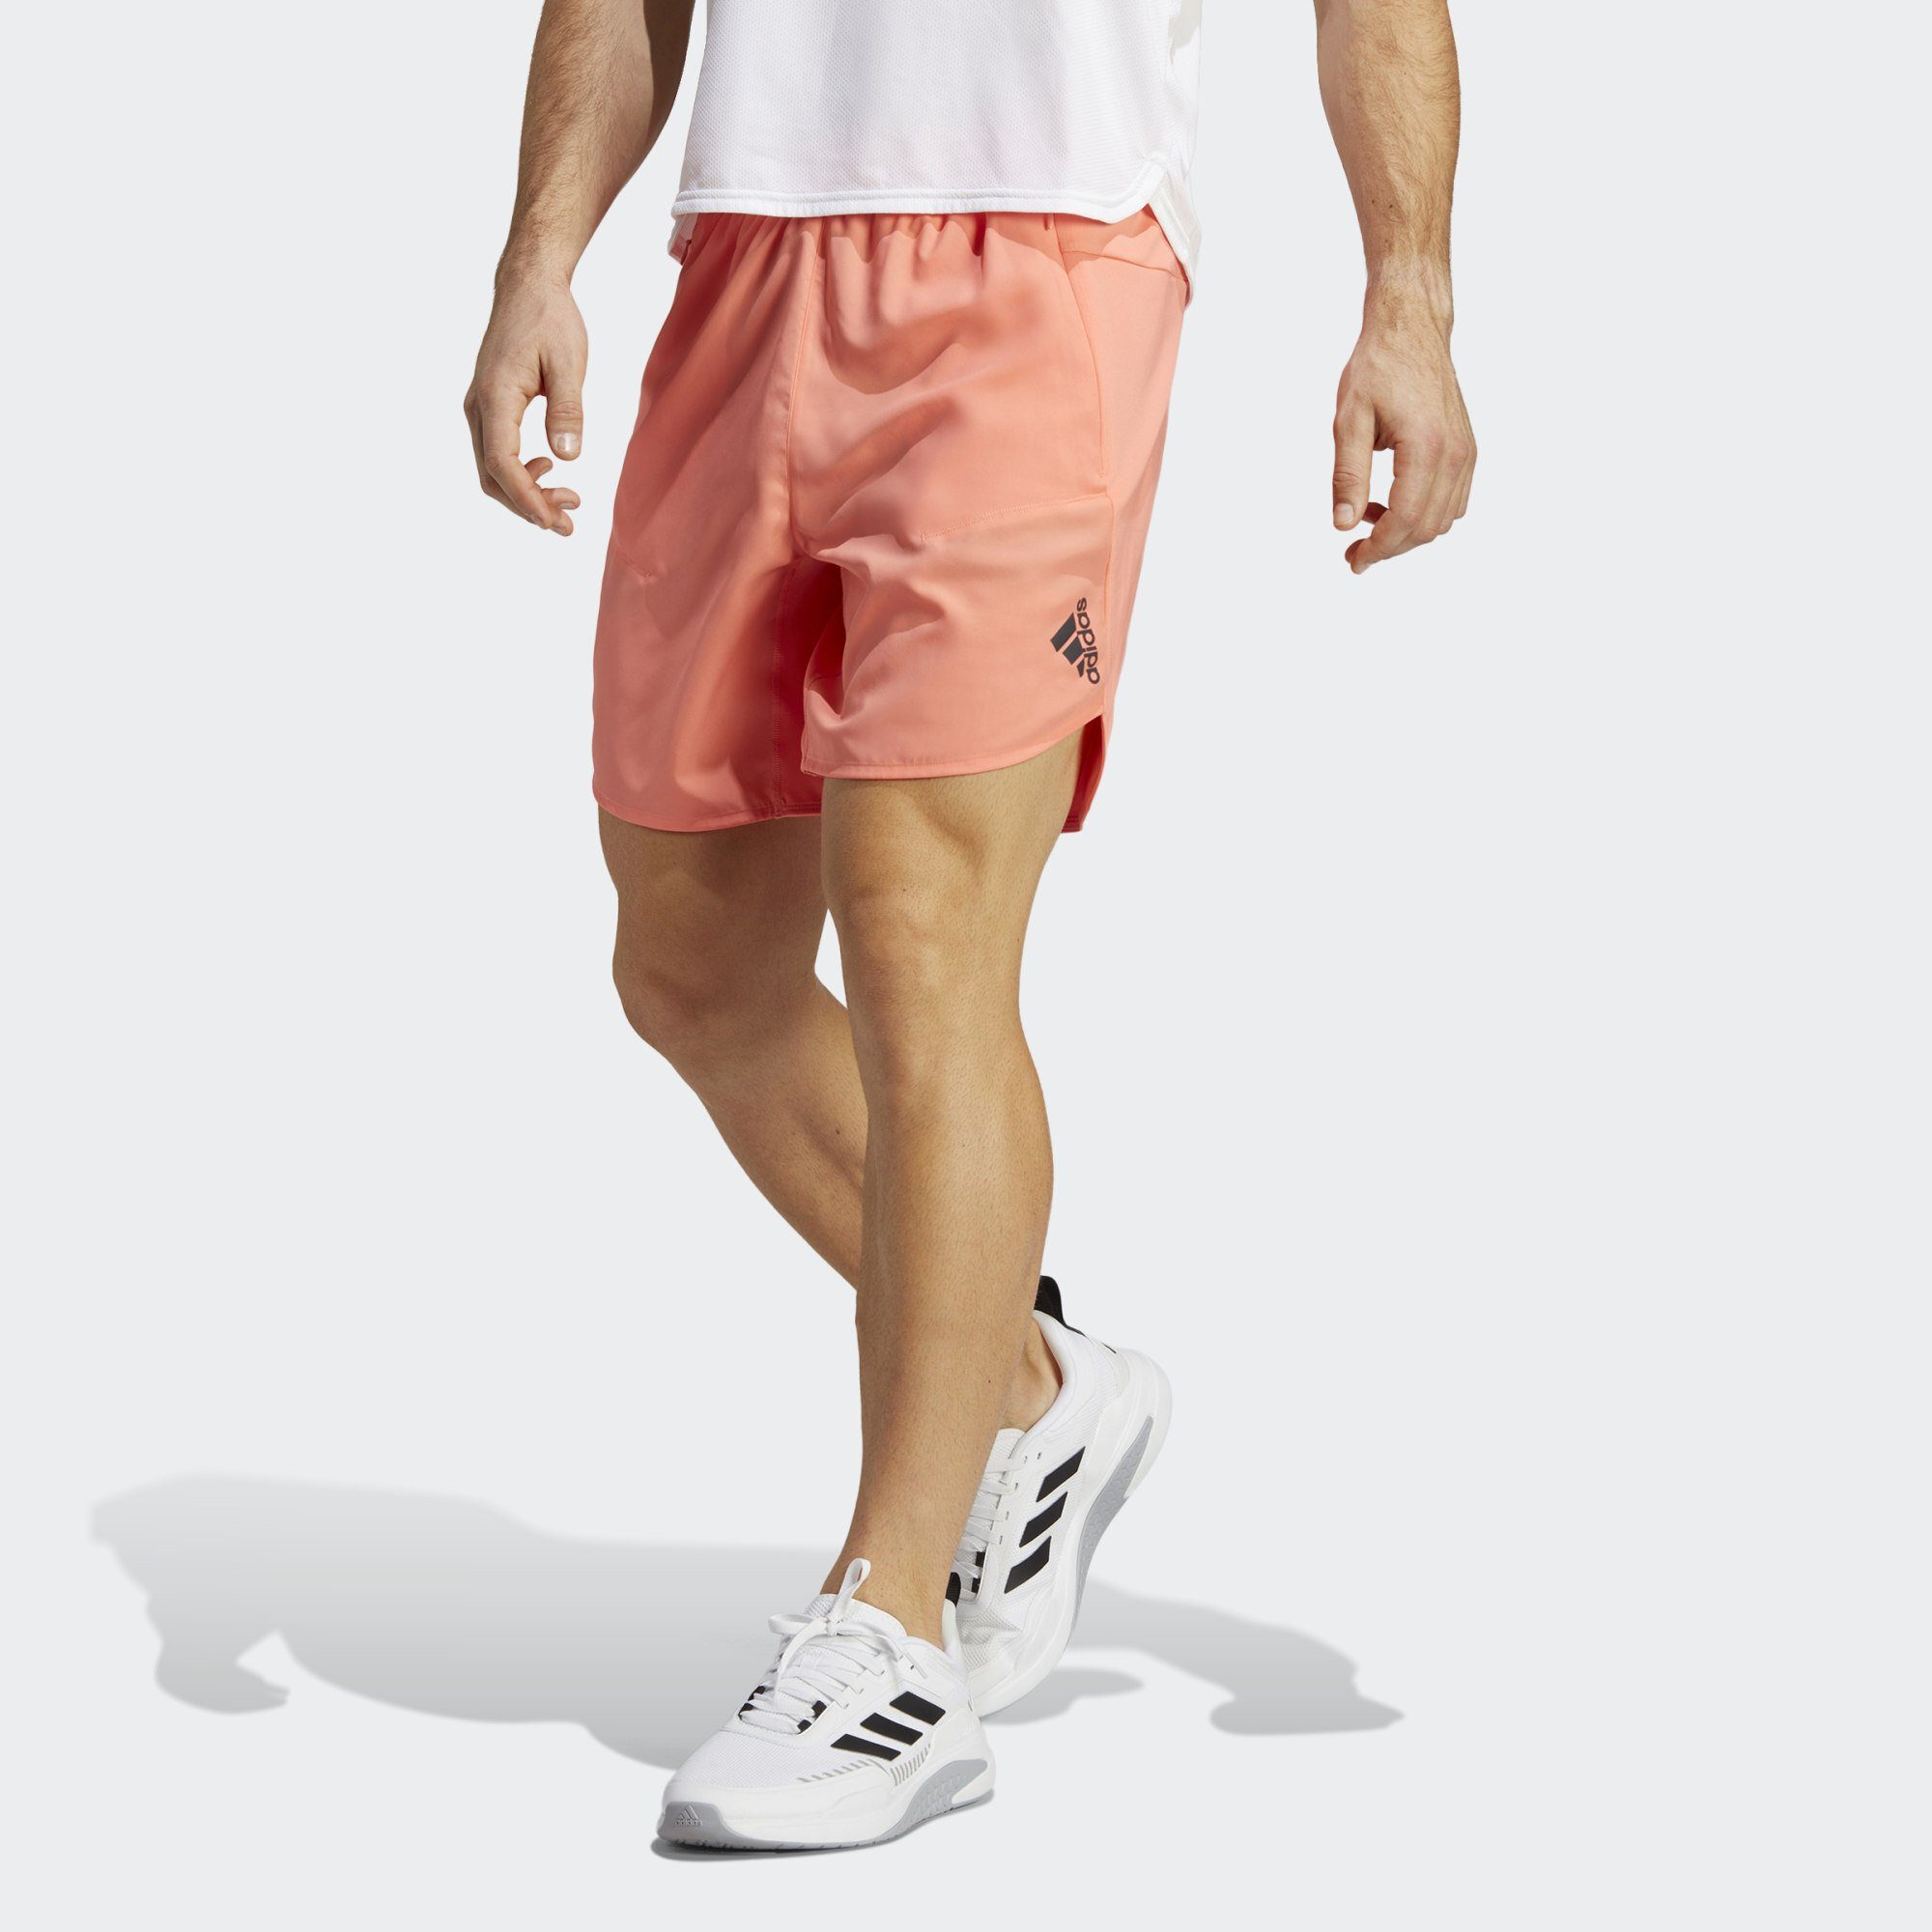 adidas Performance Funktionsshorts DESIGNED SHORTS Coral Fusion TRAINING FOR